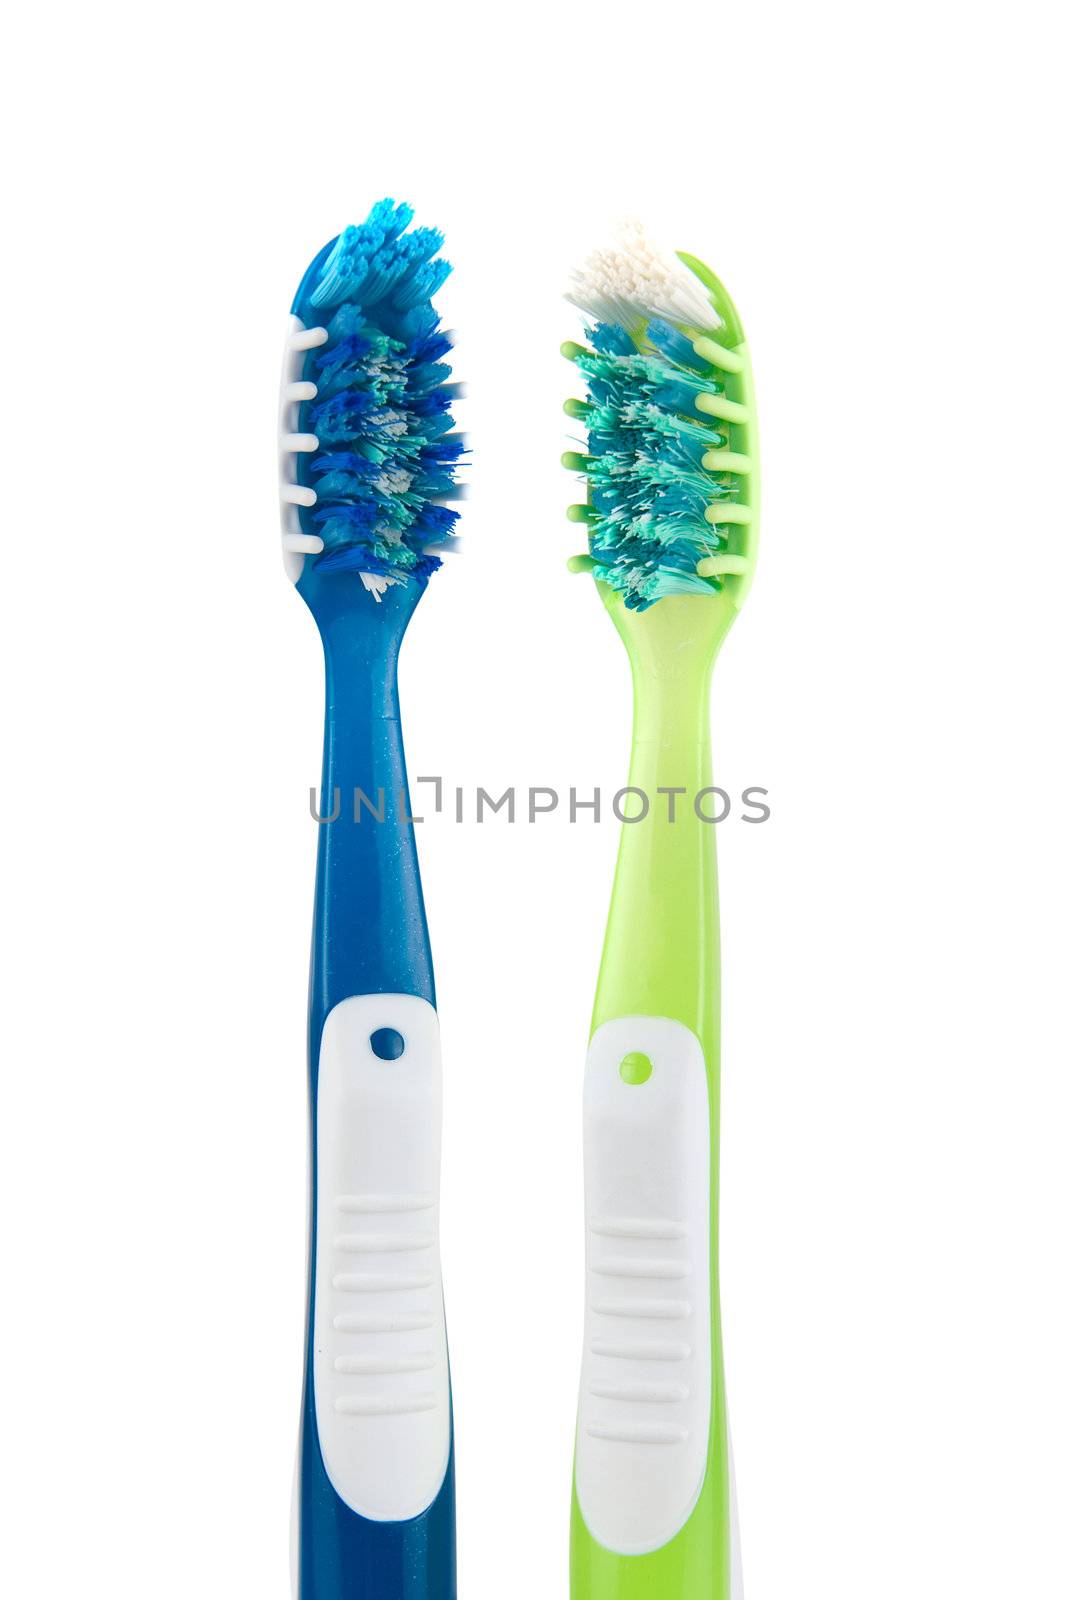 Two Toothbrushes isolated on white background